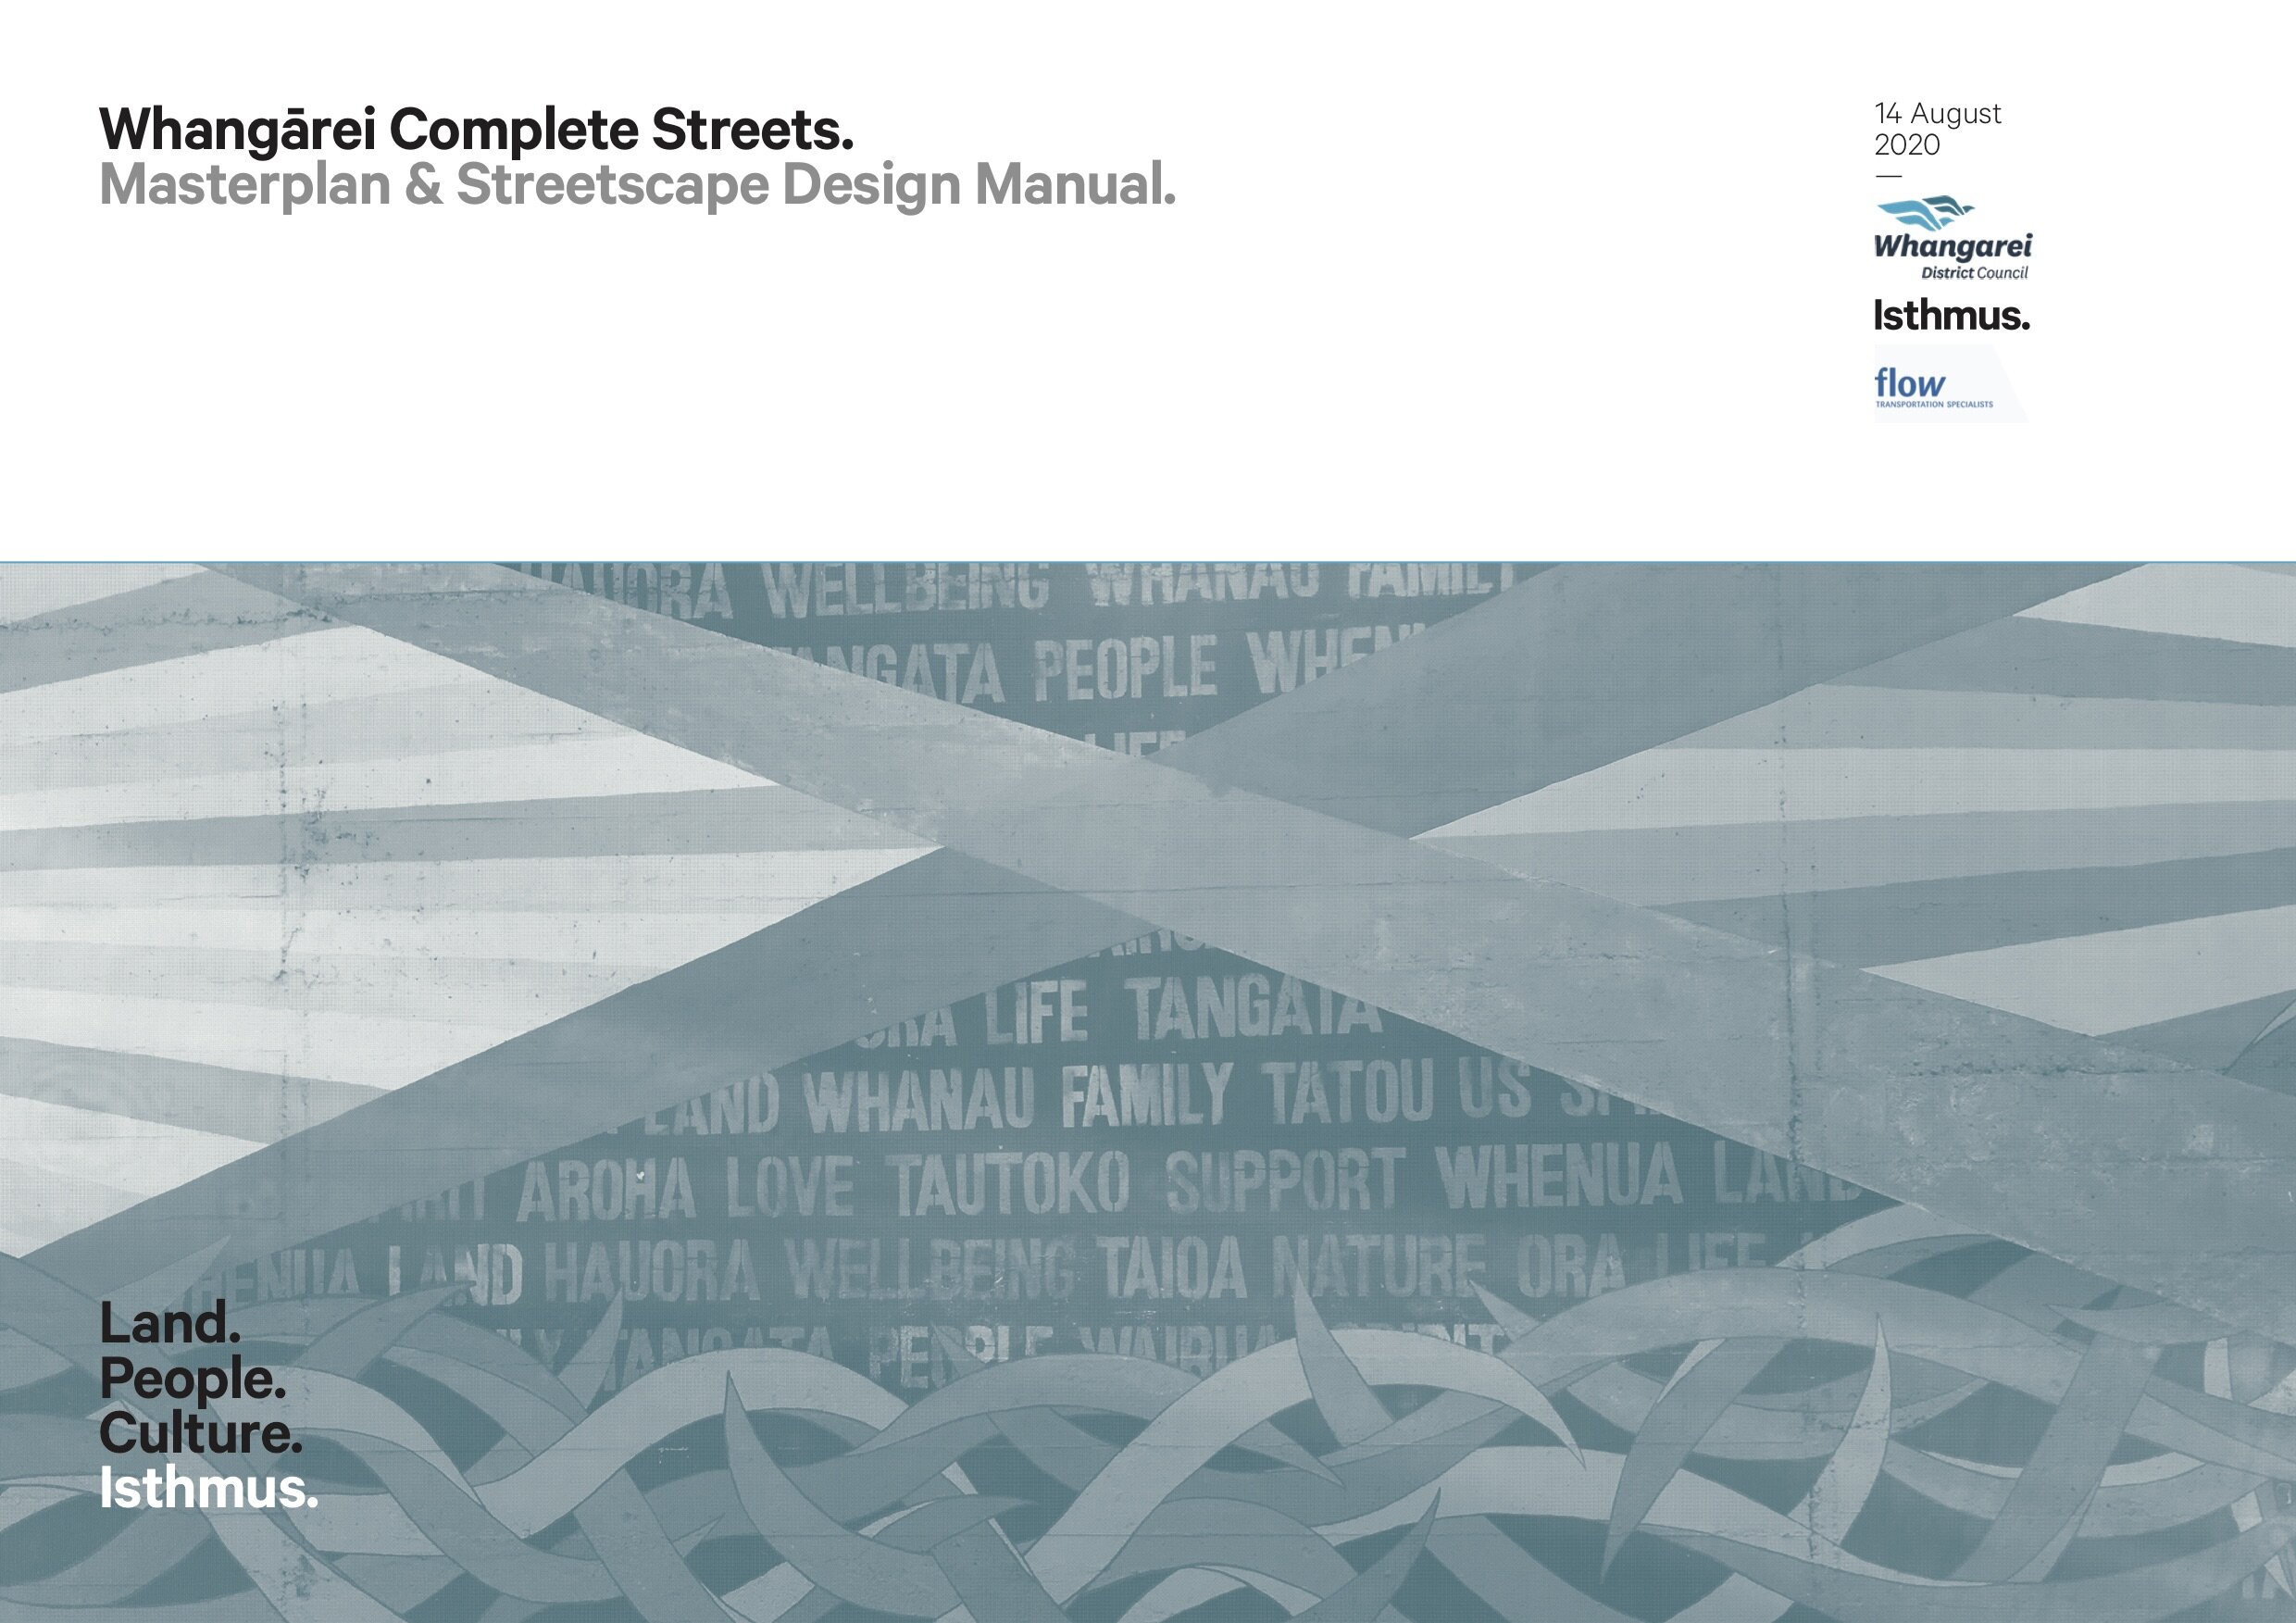 Whangarei_Complete_Streets_Masterplan_and_Design_Manual_1.jpg